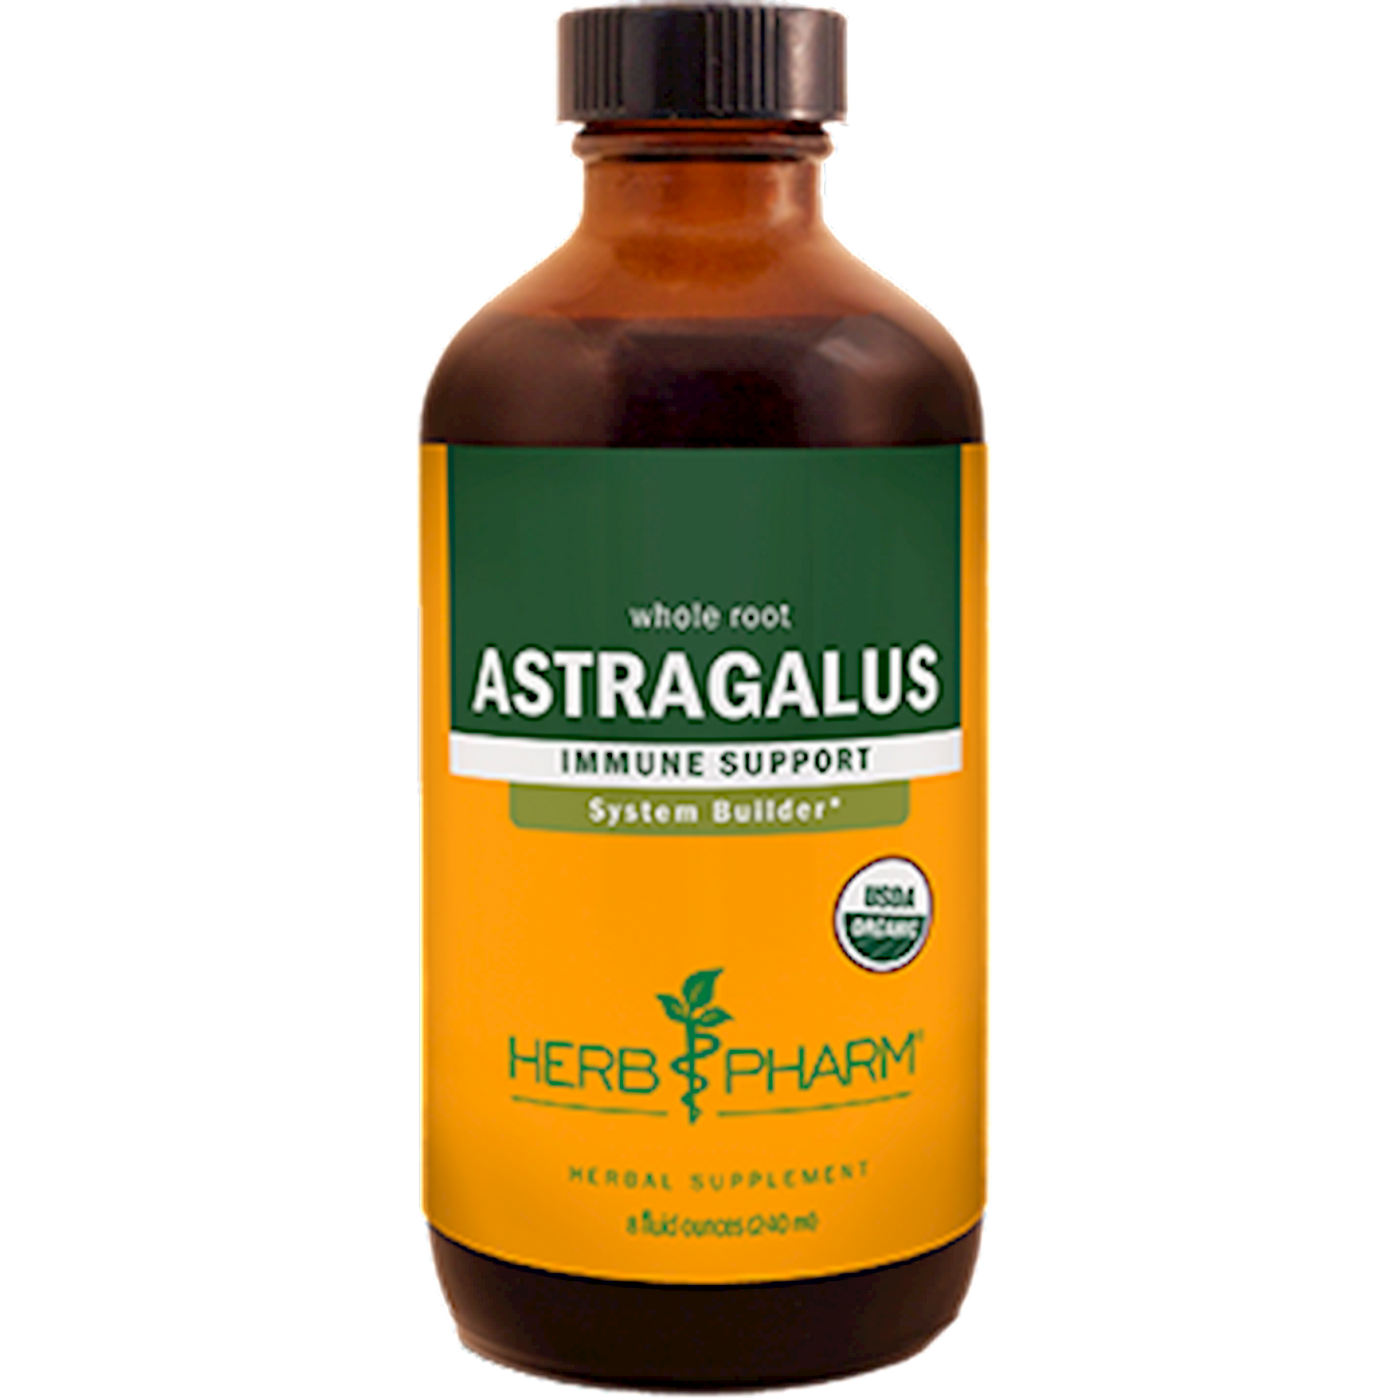 Astragalus  Curated Wellness